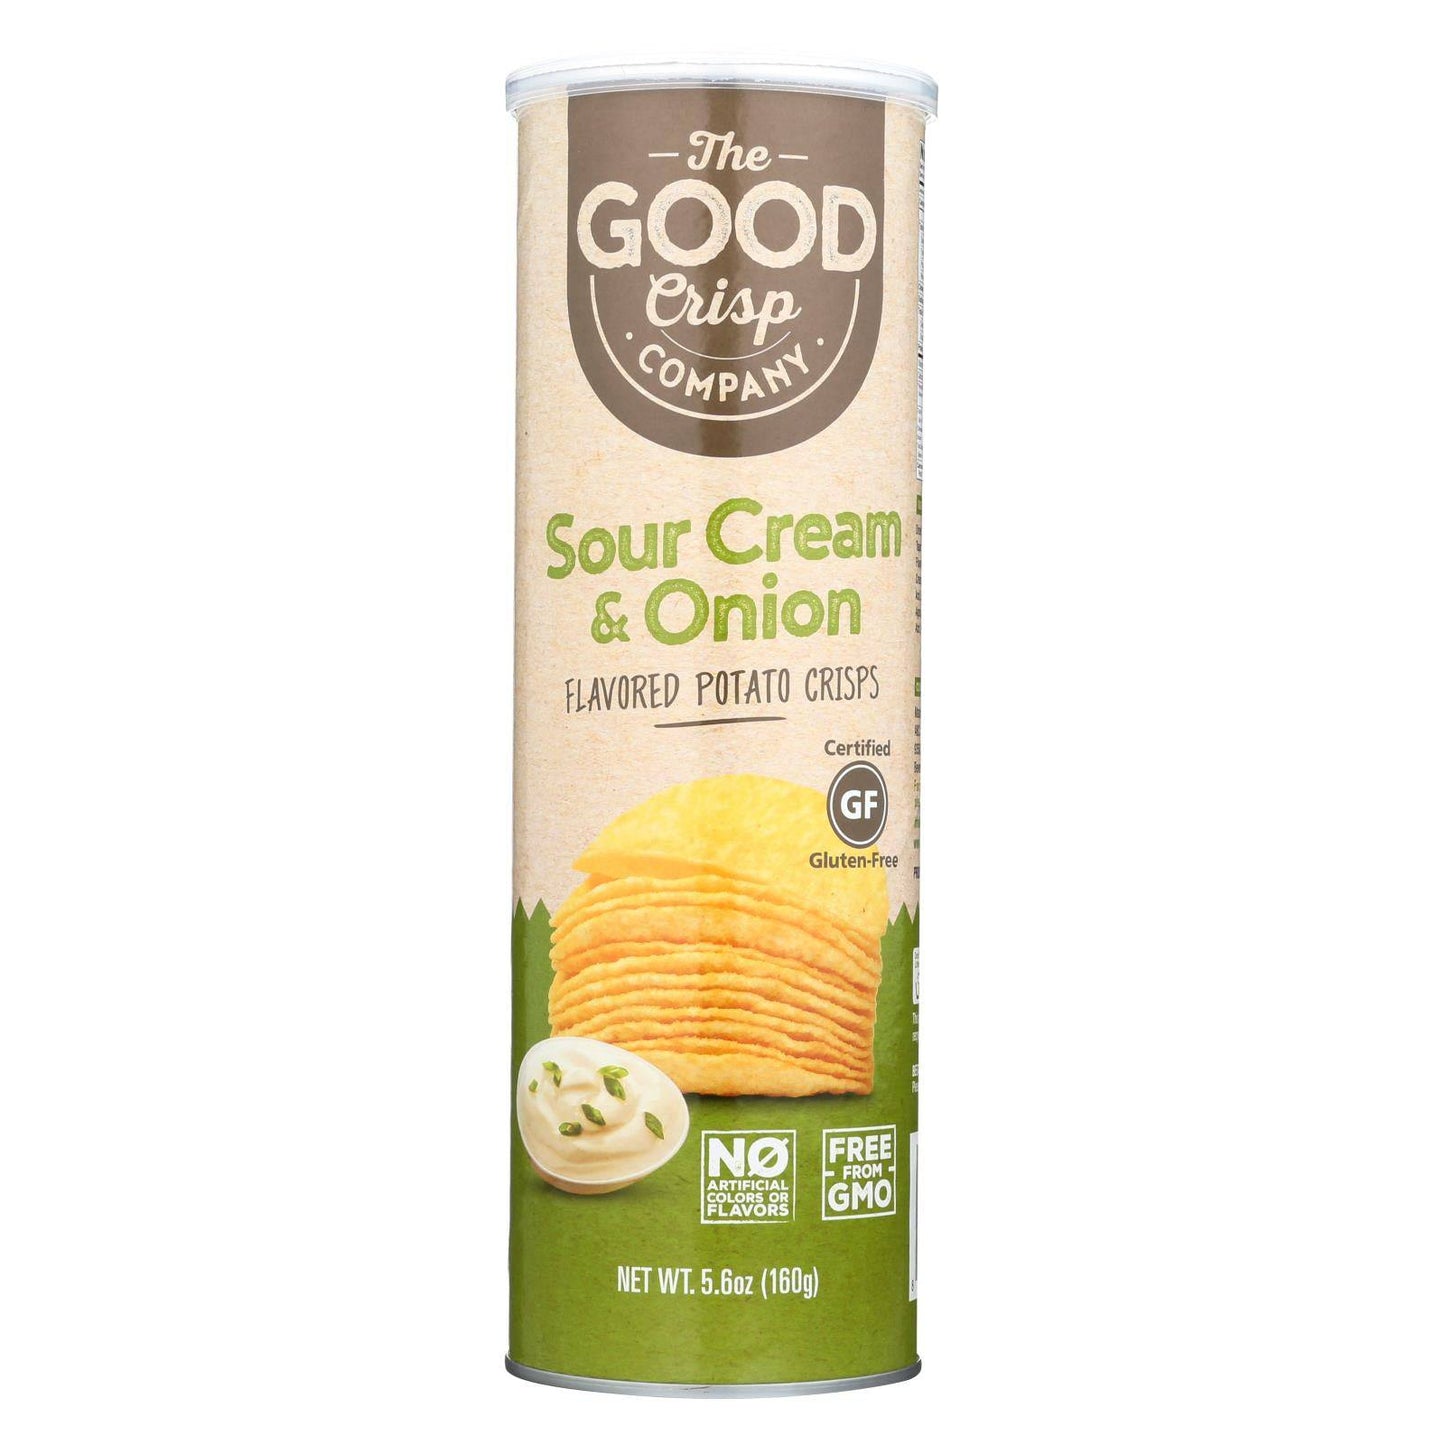 Buy The Good Crisp - Sour Cream And Onion - Case Of 8 - 5.6 Oz.  at OnlyNaturals.us